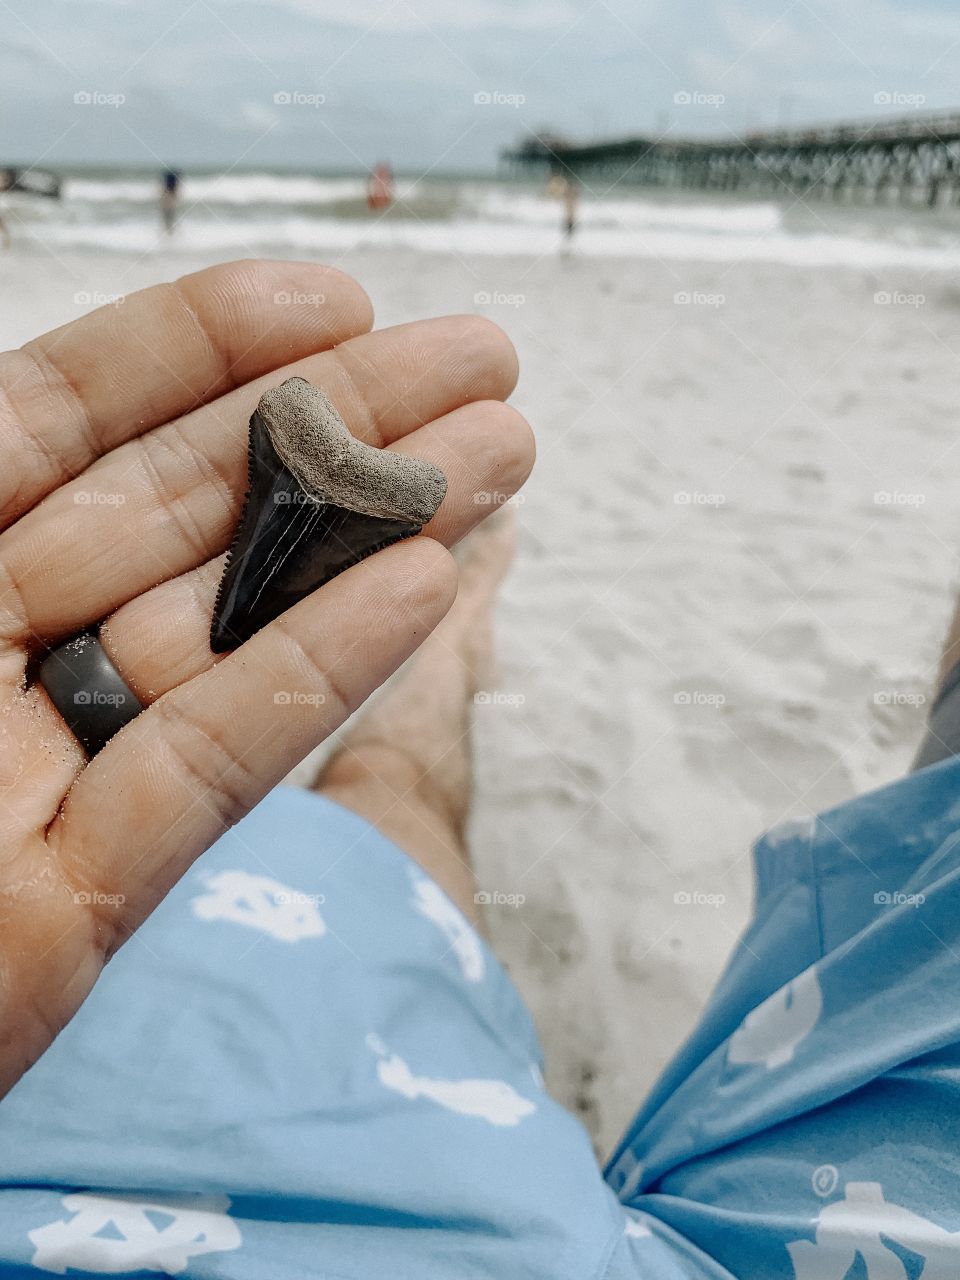 Great white shark tooth at Myrtle beach